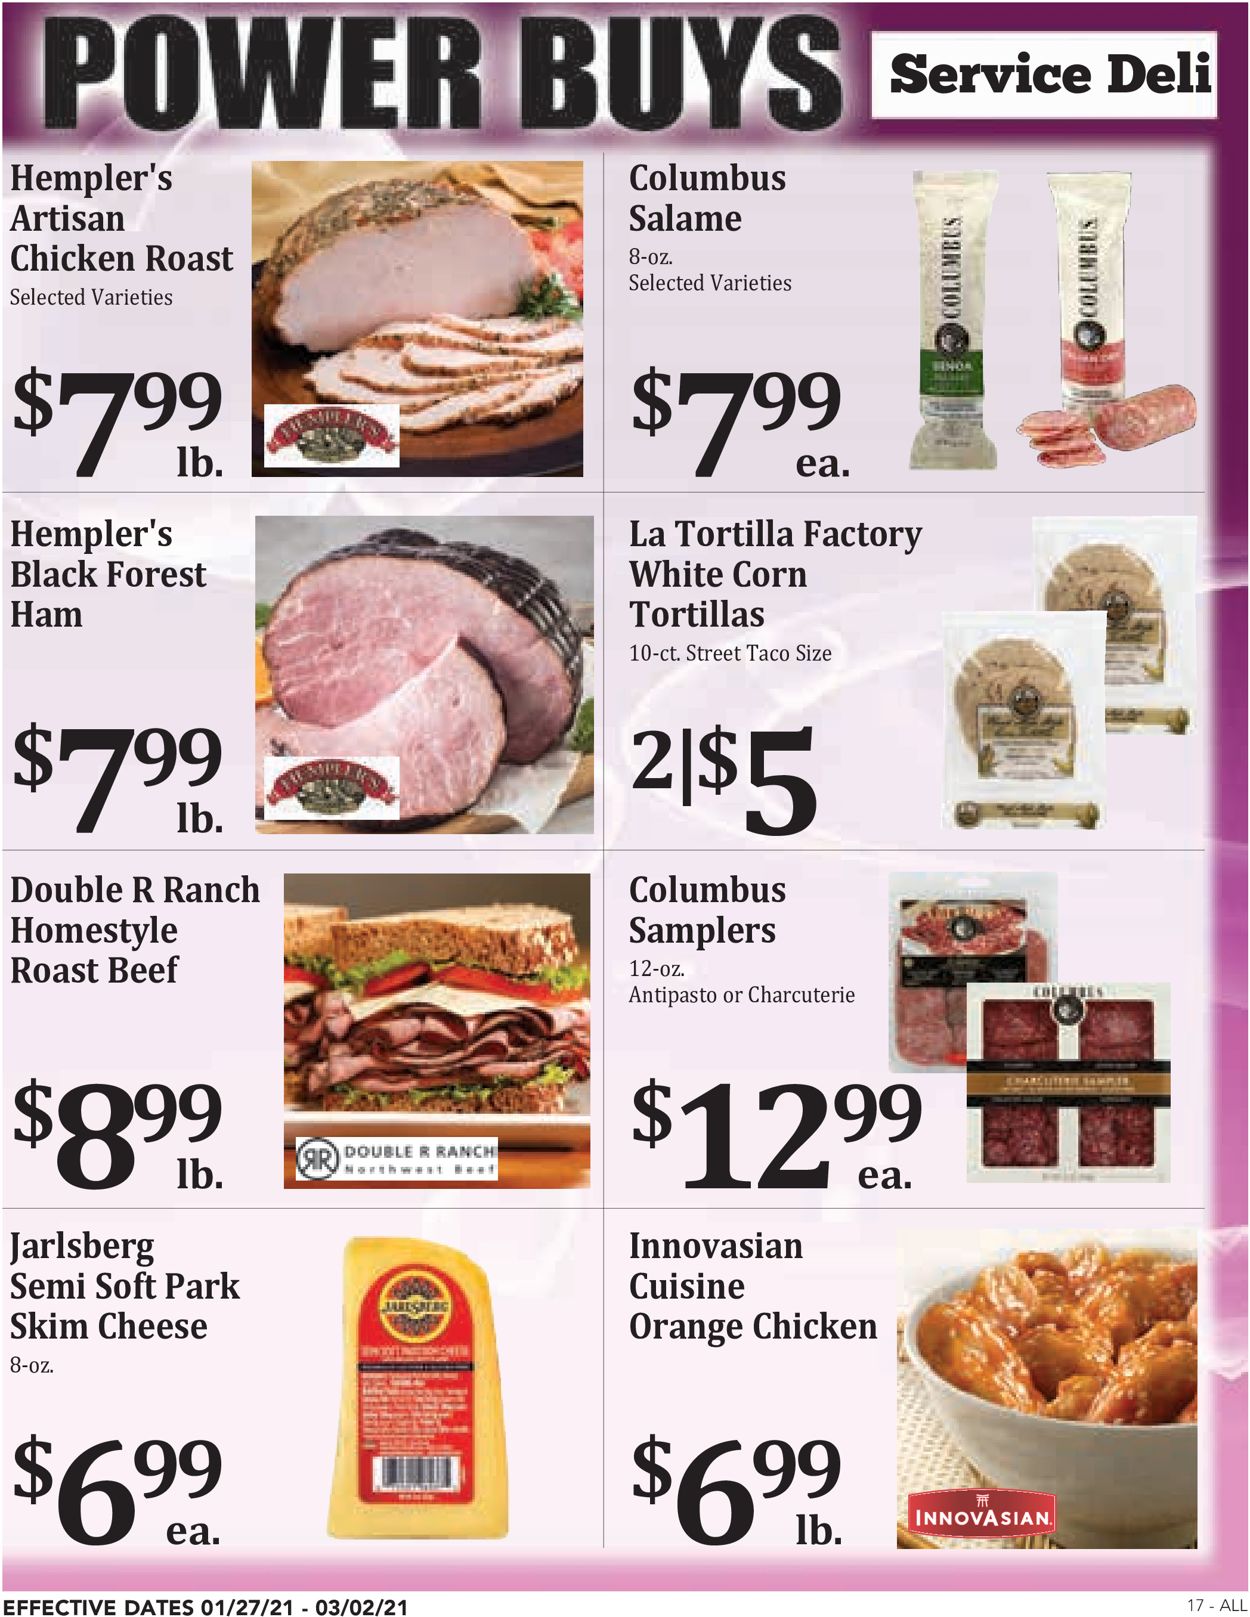 Rosauers Ad from 01/27/2021